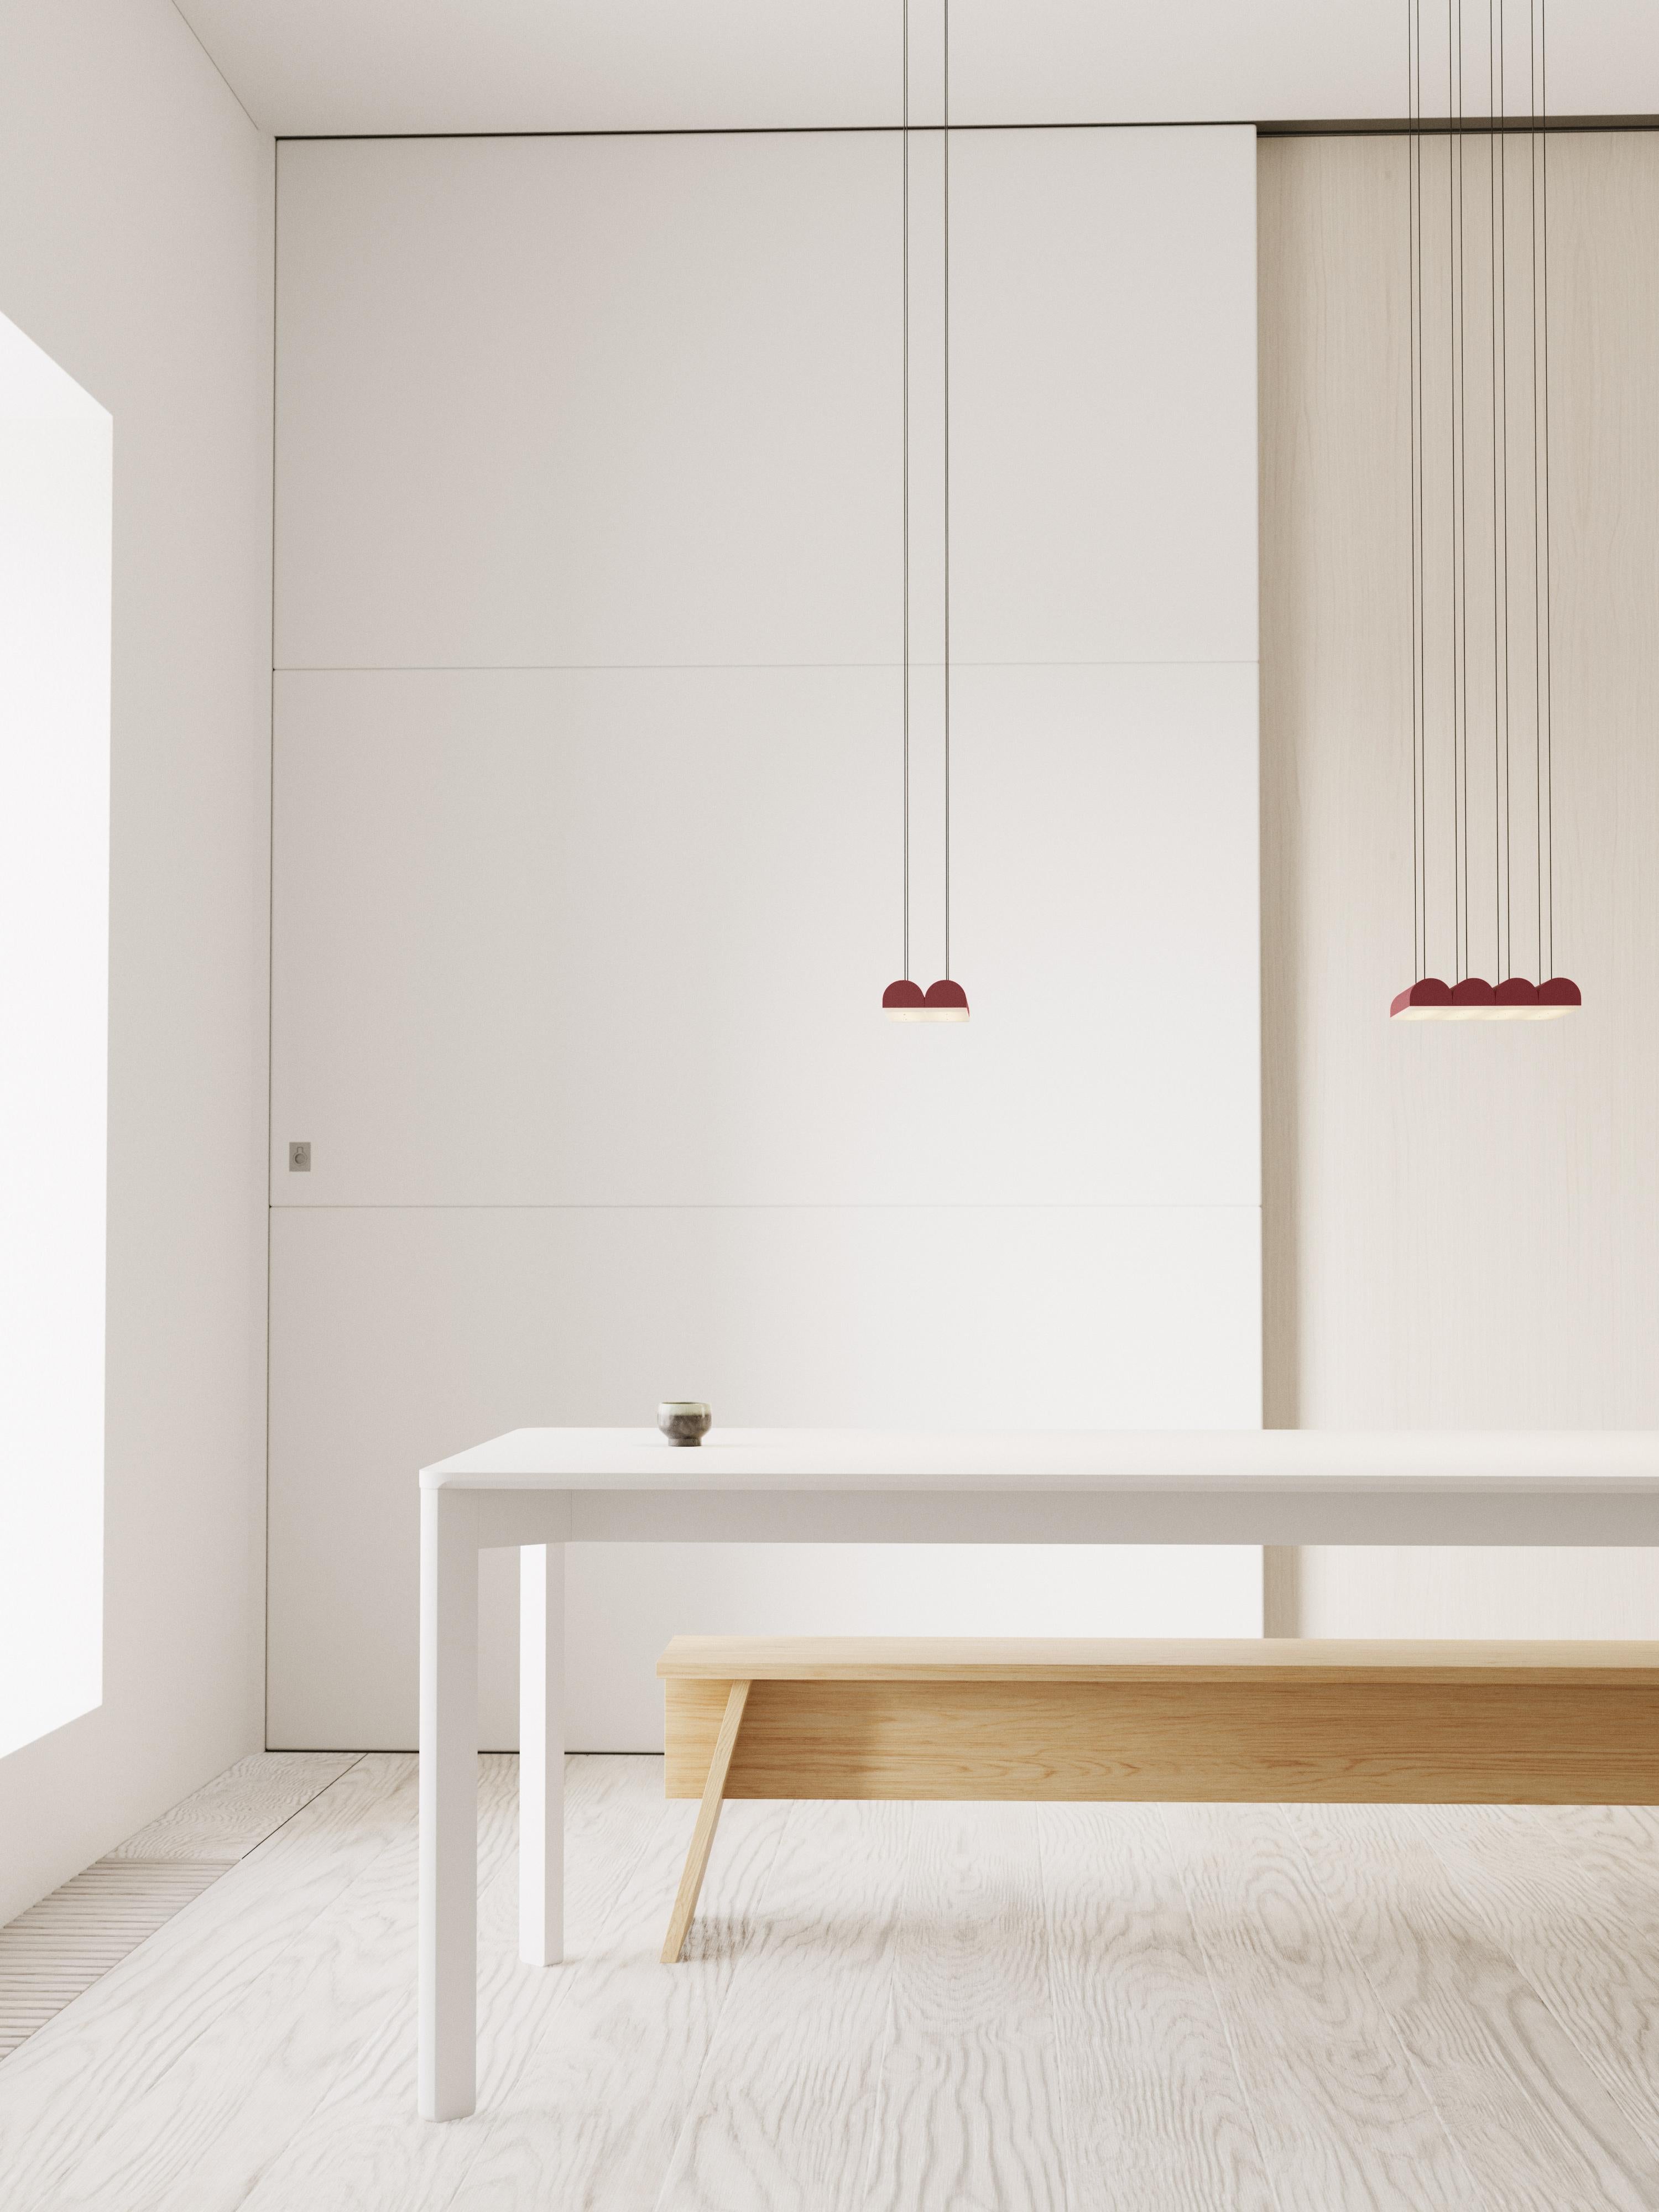 Hutchison is the thoughtful study of soft curves and hard lines, a rivalry of vertical and horizontal forces and a play of scale and repetition. Alone, it self-defines as a frank, decorative pendant light. In multiples, it evokes the iconic patterns